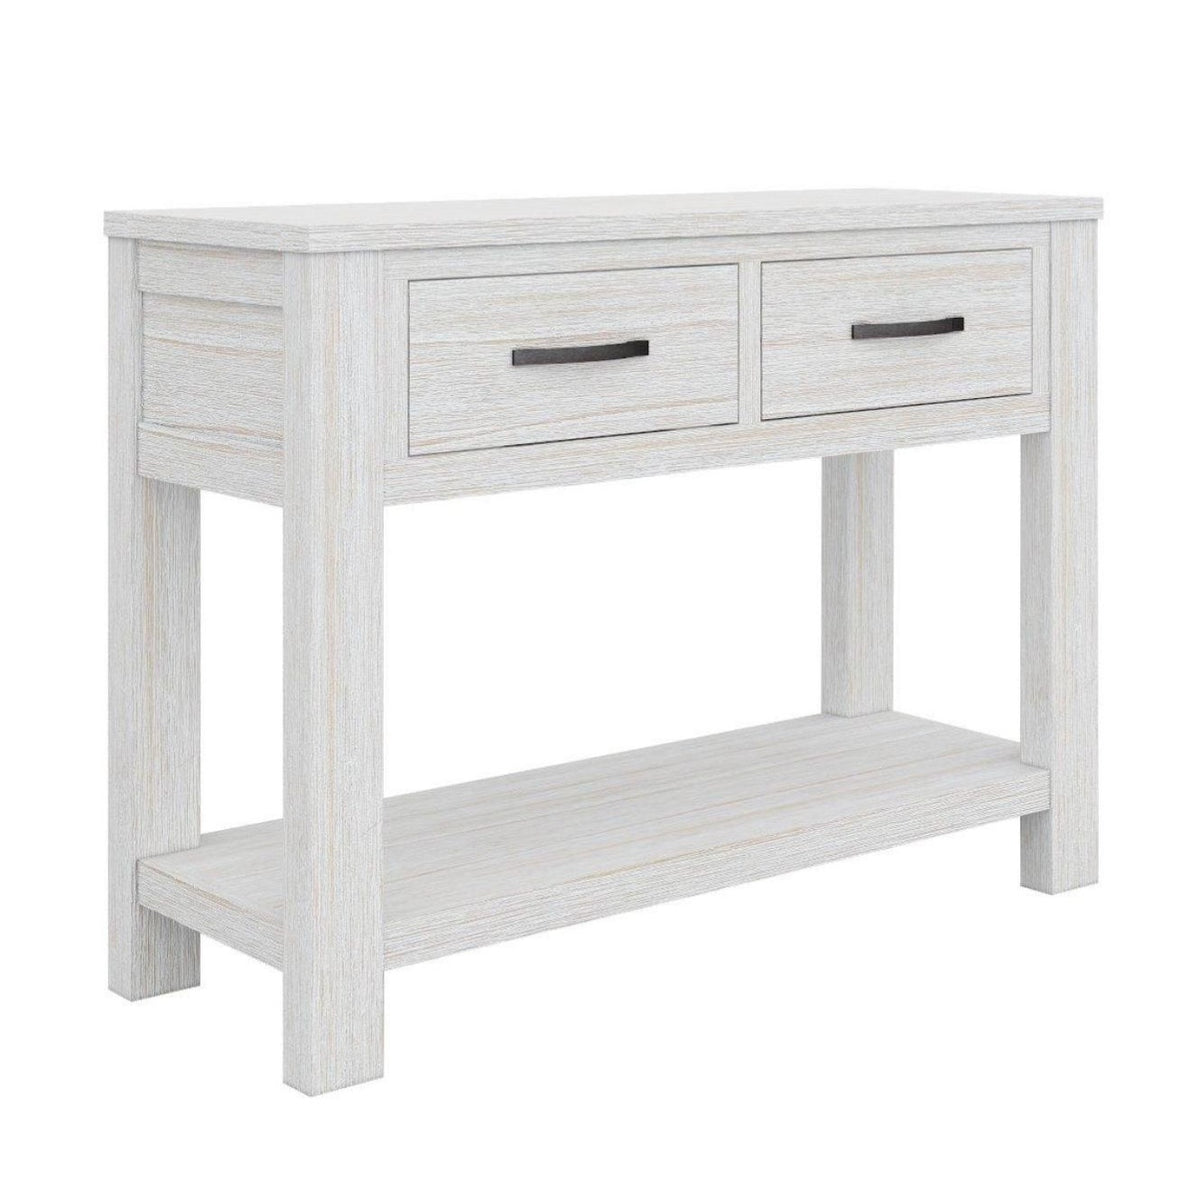 Foxglove Console Table with Solid Mt Ash Wood in White - 110cm - Notbrand